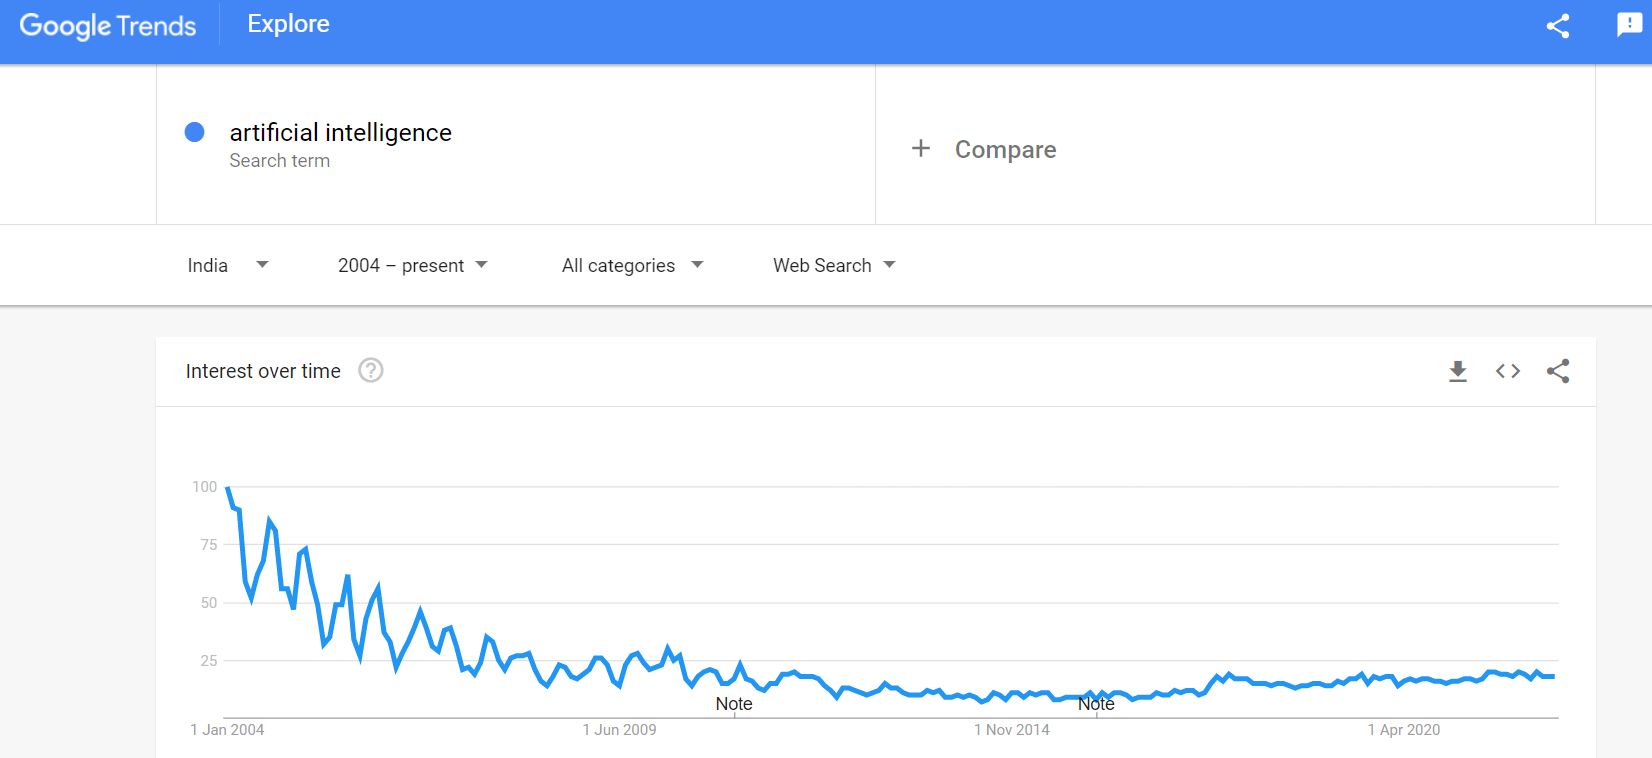 AI keyword search trend from 2004